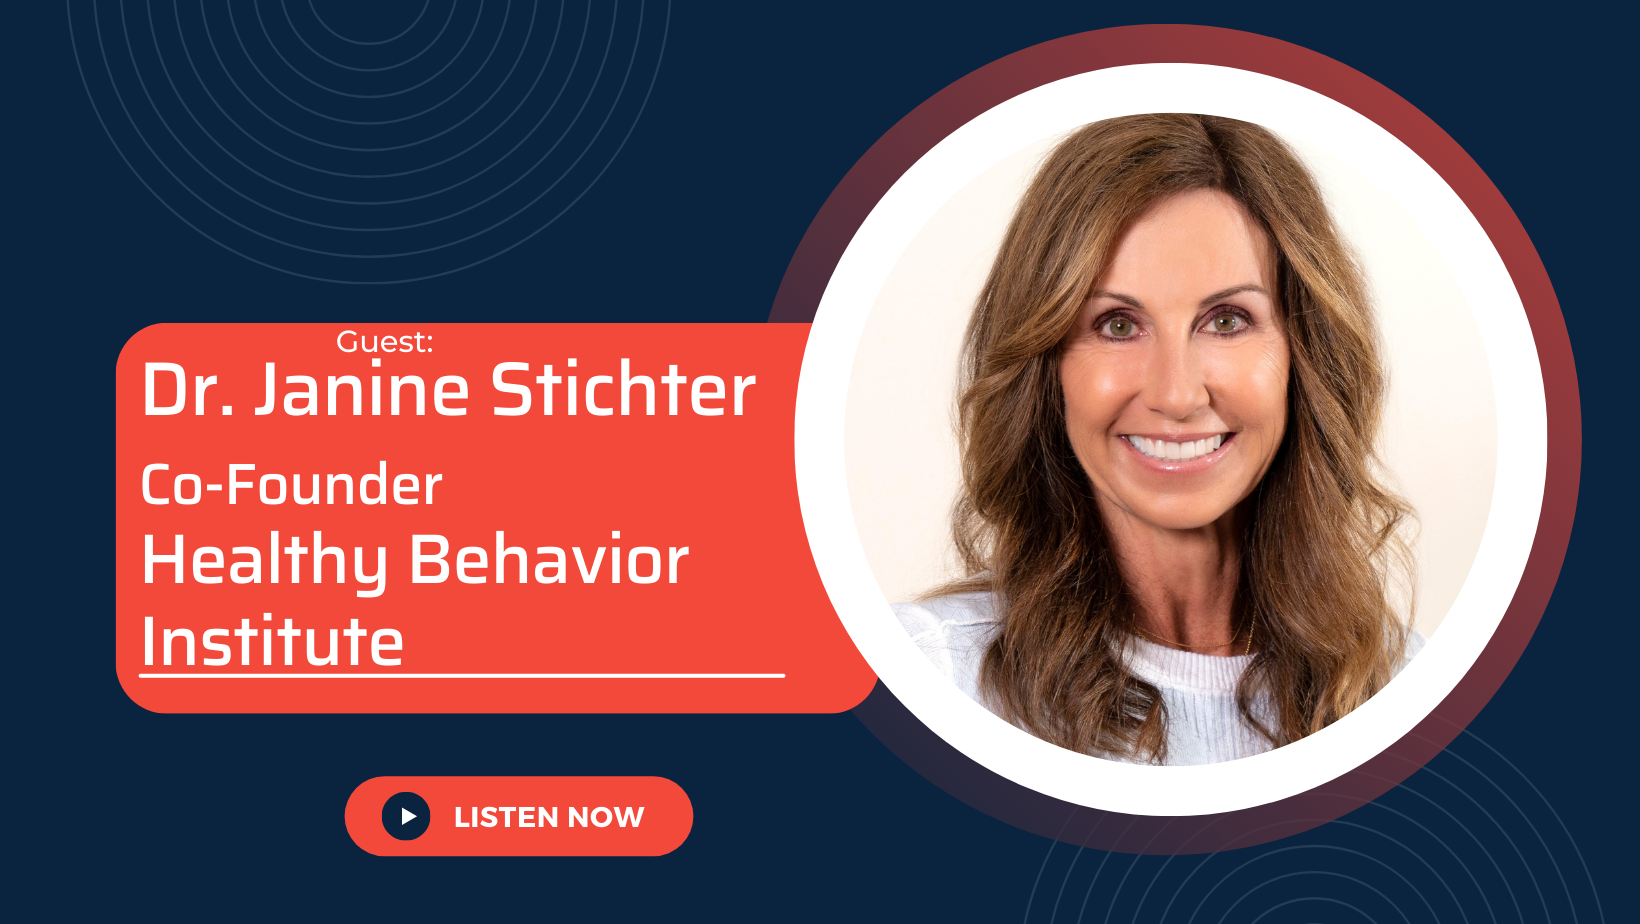 How To Find The Perfect Partner For Your Business with the Co-Founder of Healthy Behavior Institute, Dr. Janine Stichter